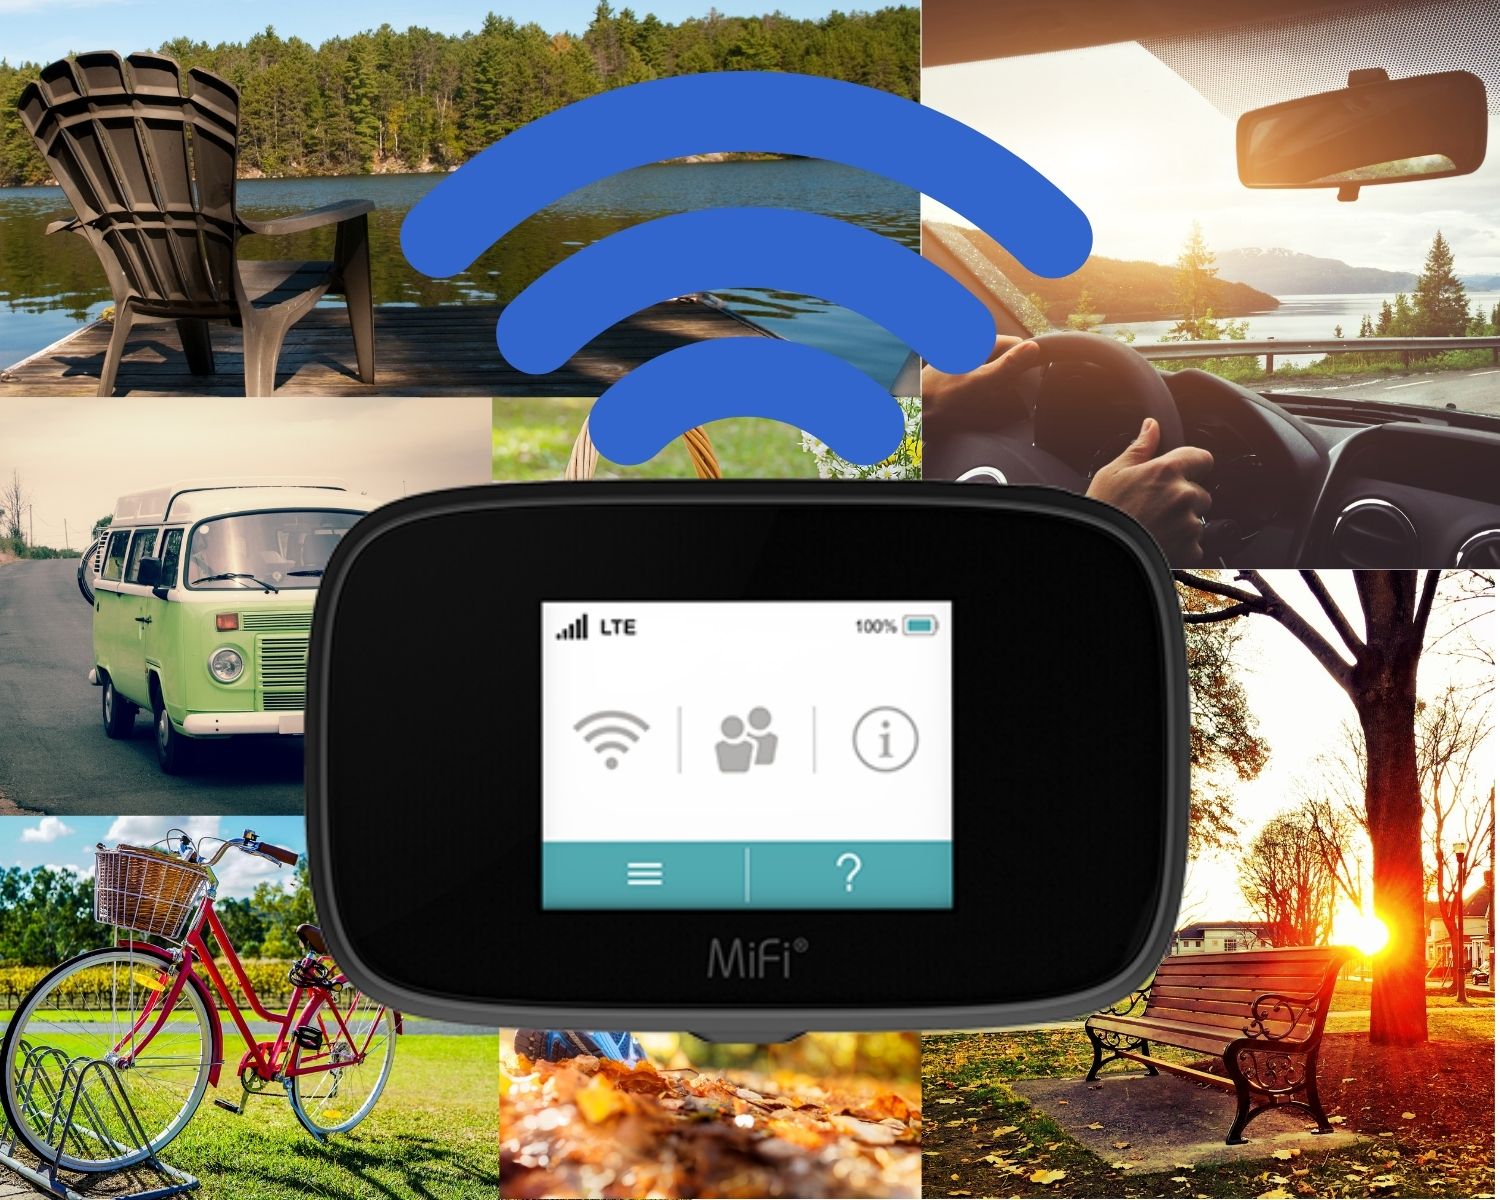 A graphic of a mobile hotspot in front of a collage of vacation scenery